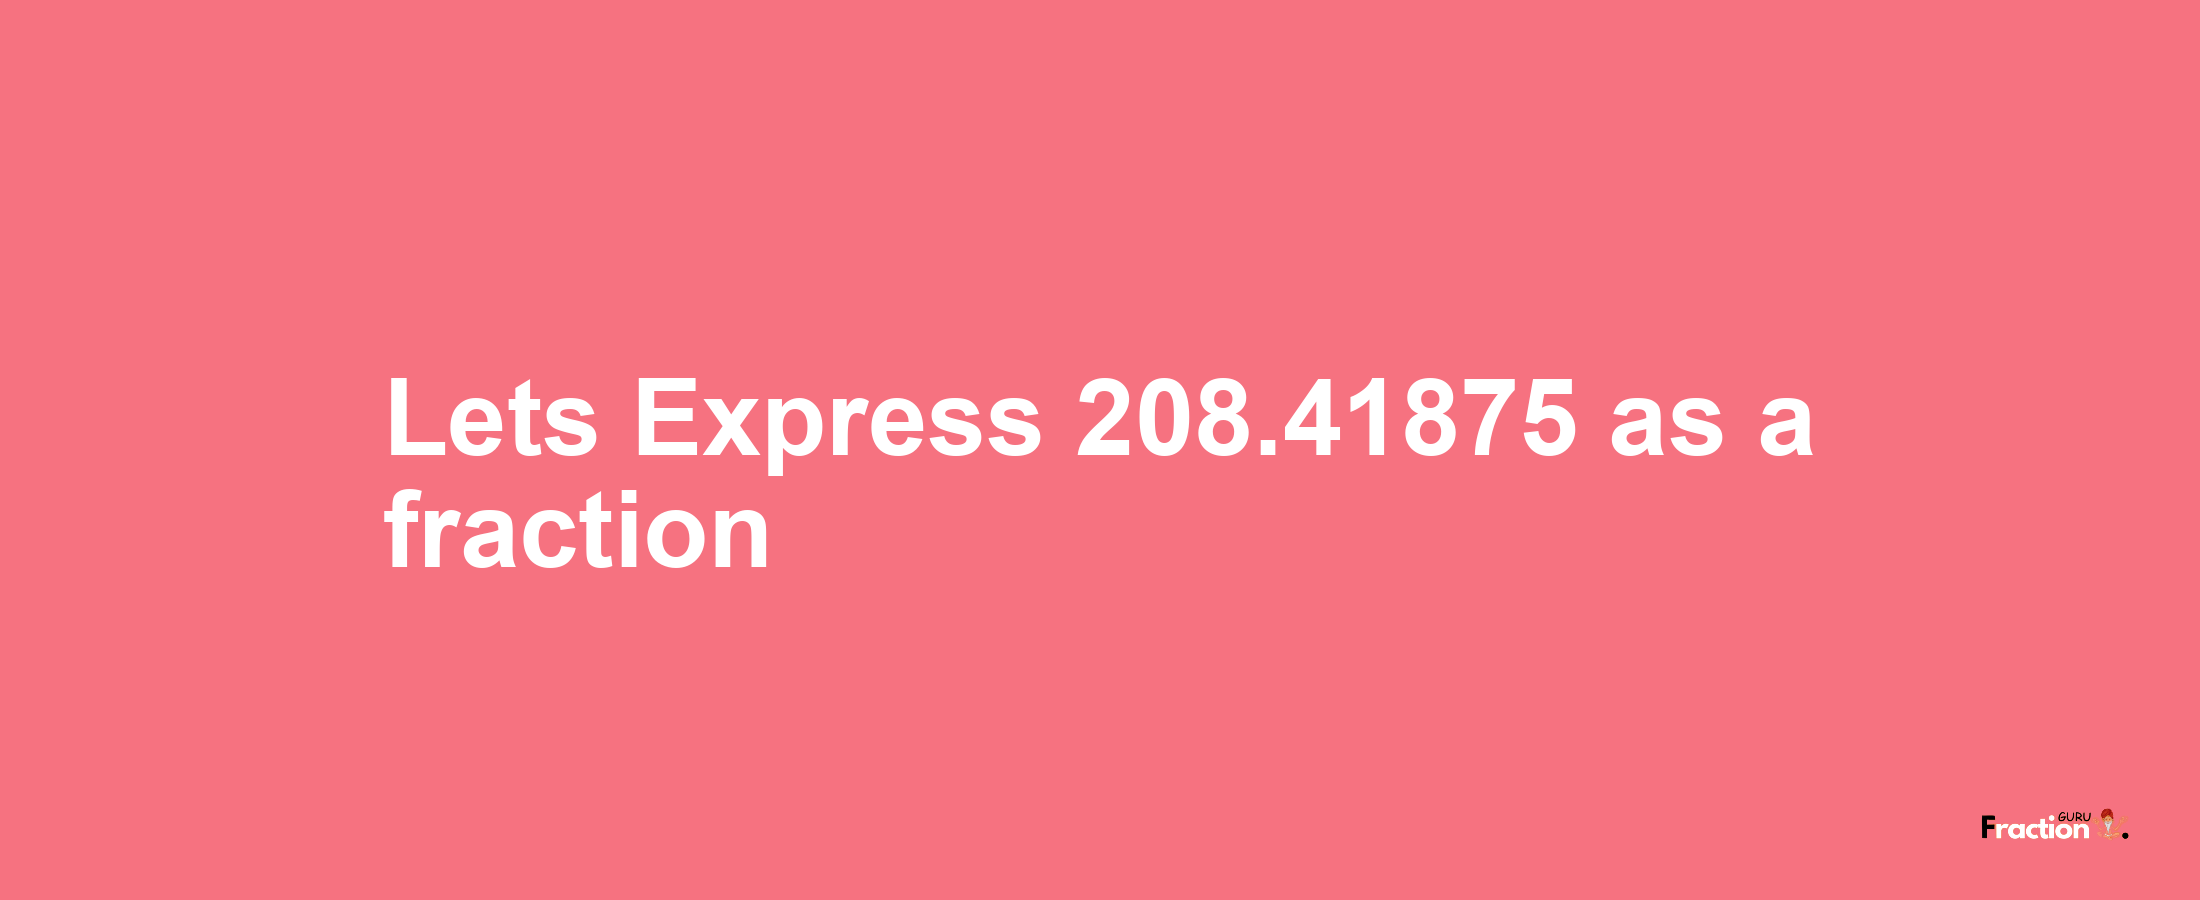 Lets Express 208.41875 as afraction